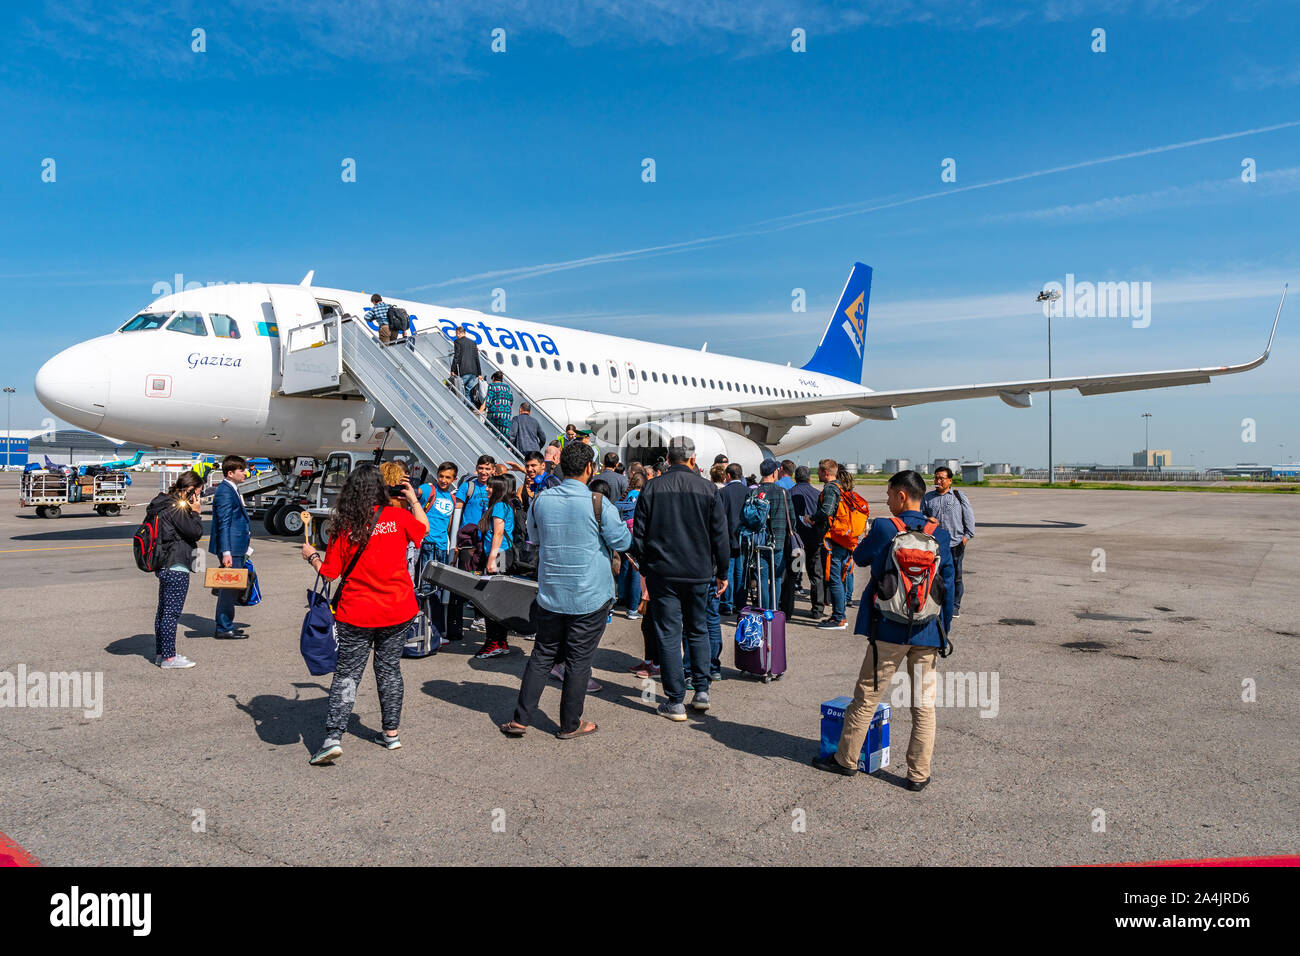 At Almaty International Airport Passengers are Waiting Outside for Boarding the Air Astana Aircraft Plane Stock Photo